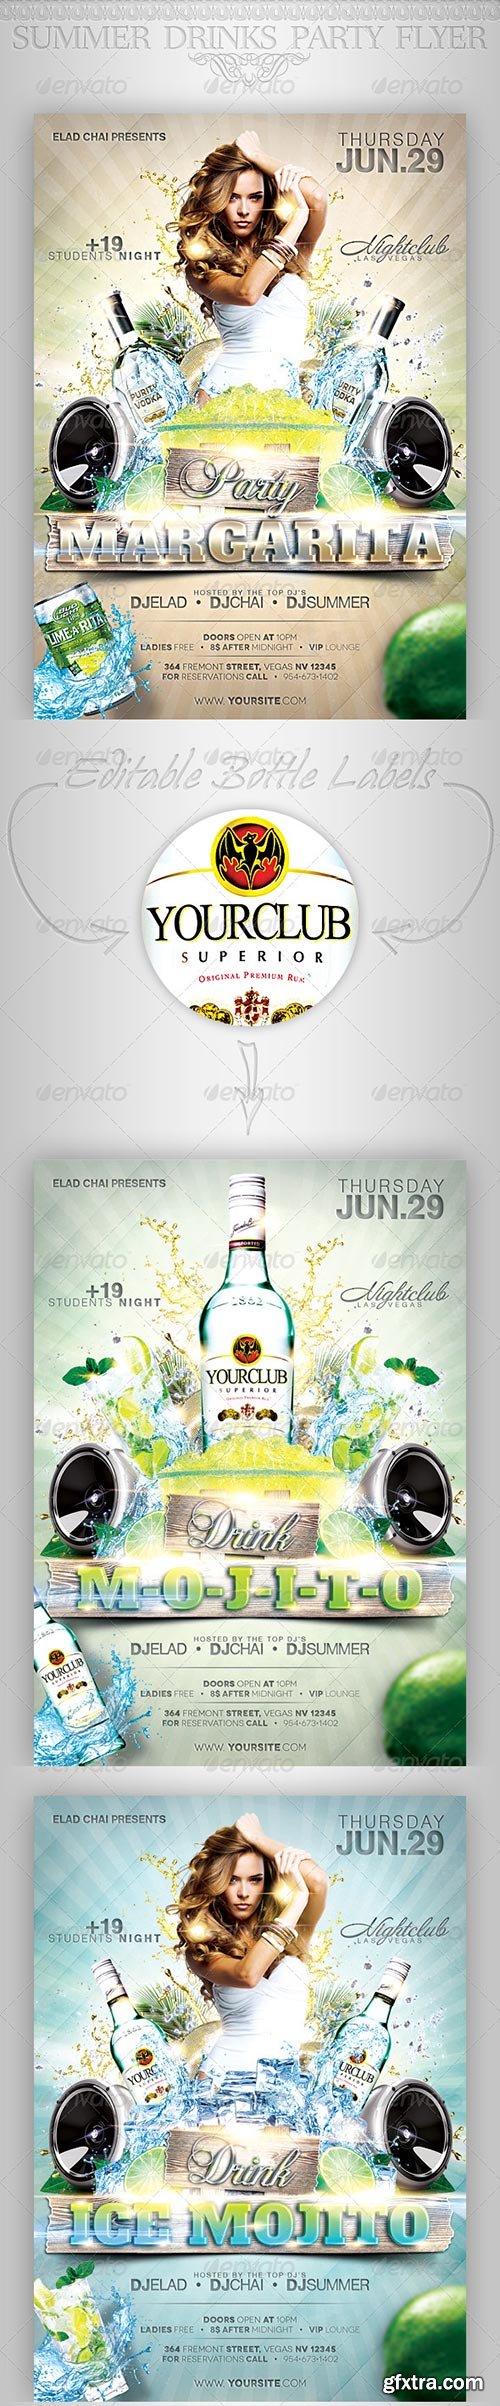 GraphicRiver - Summer Drinks Event Party Flyer